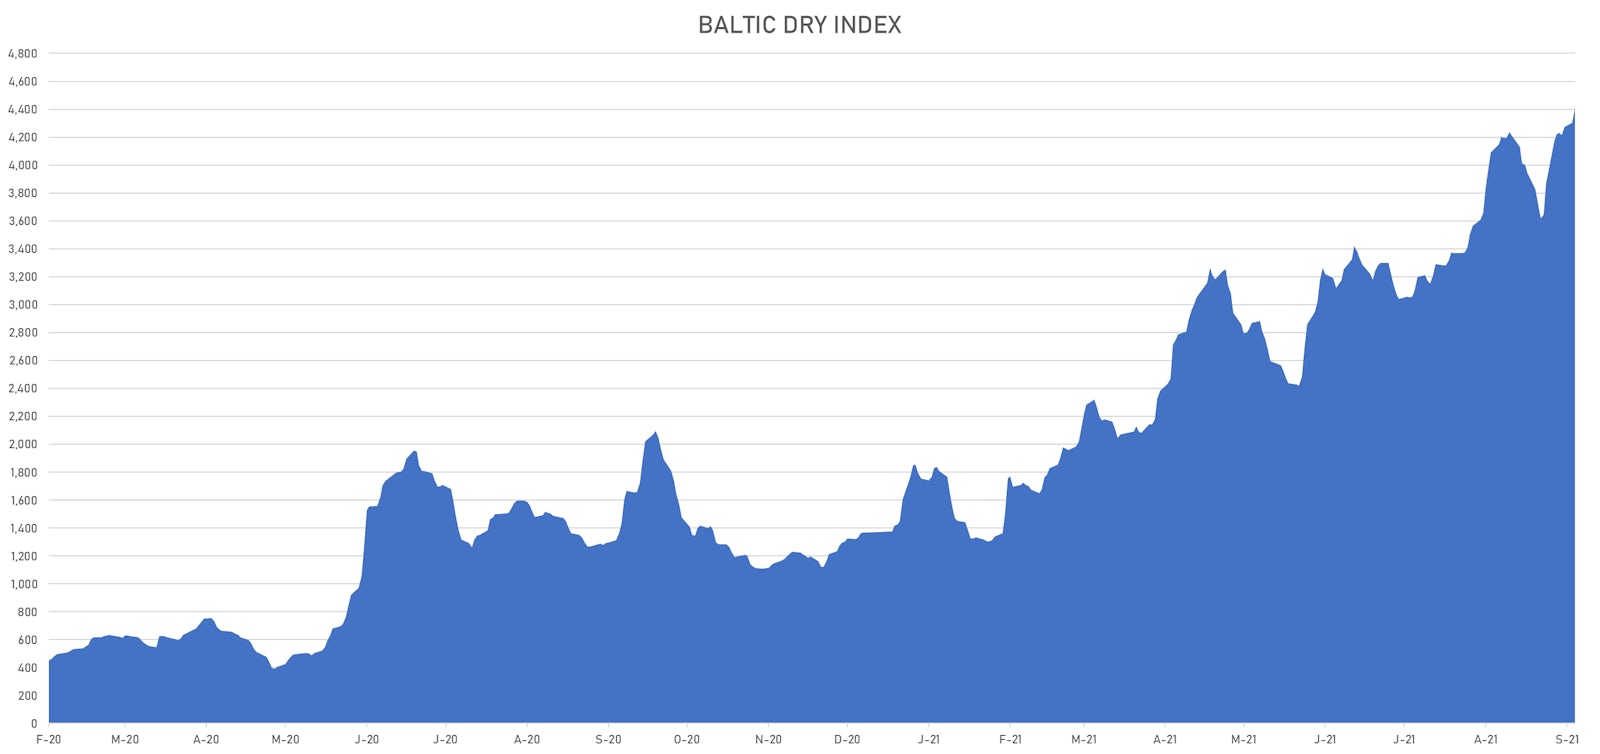 Baltic Dry Shipping Index Has More Than Tripled So Far This Year | Sources: ϕpost, Refinitiv data